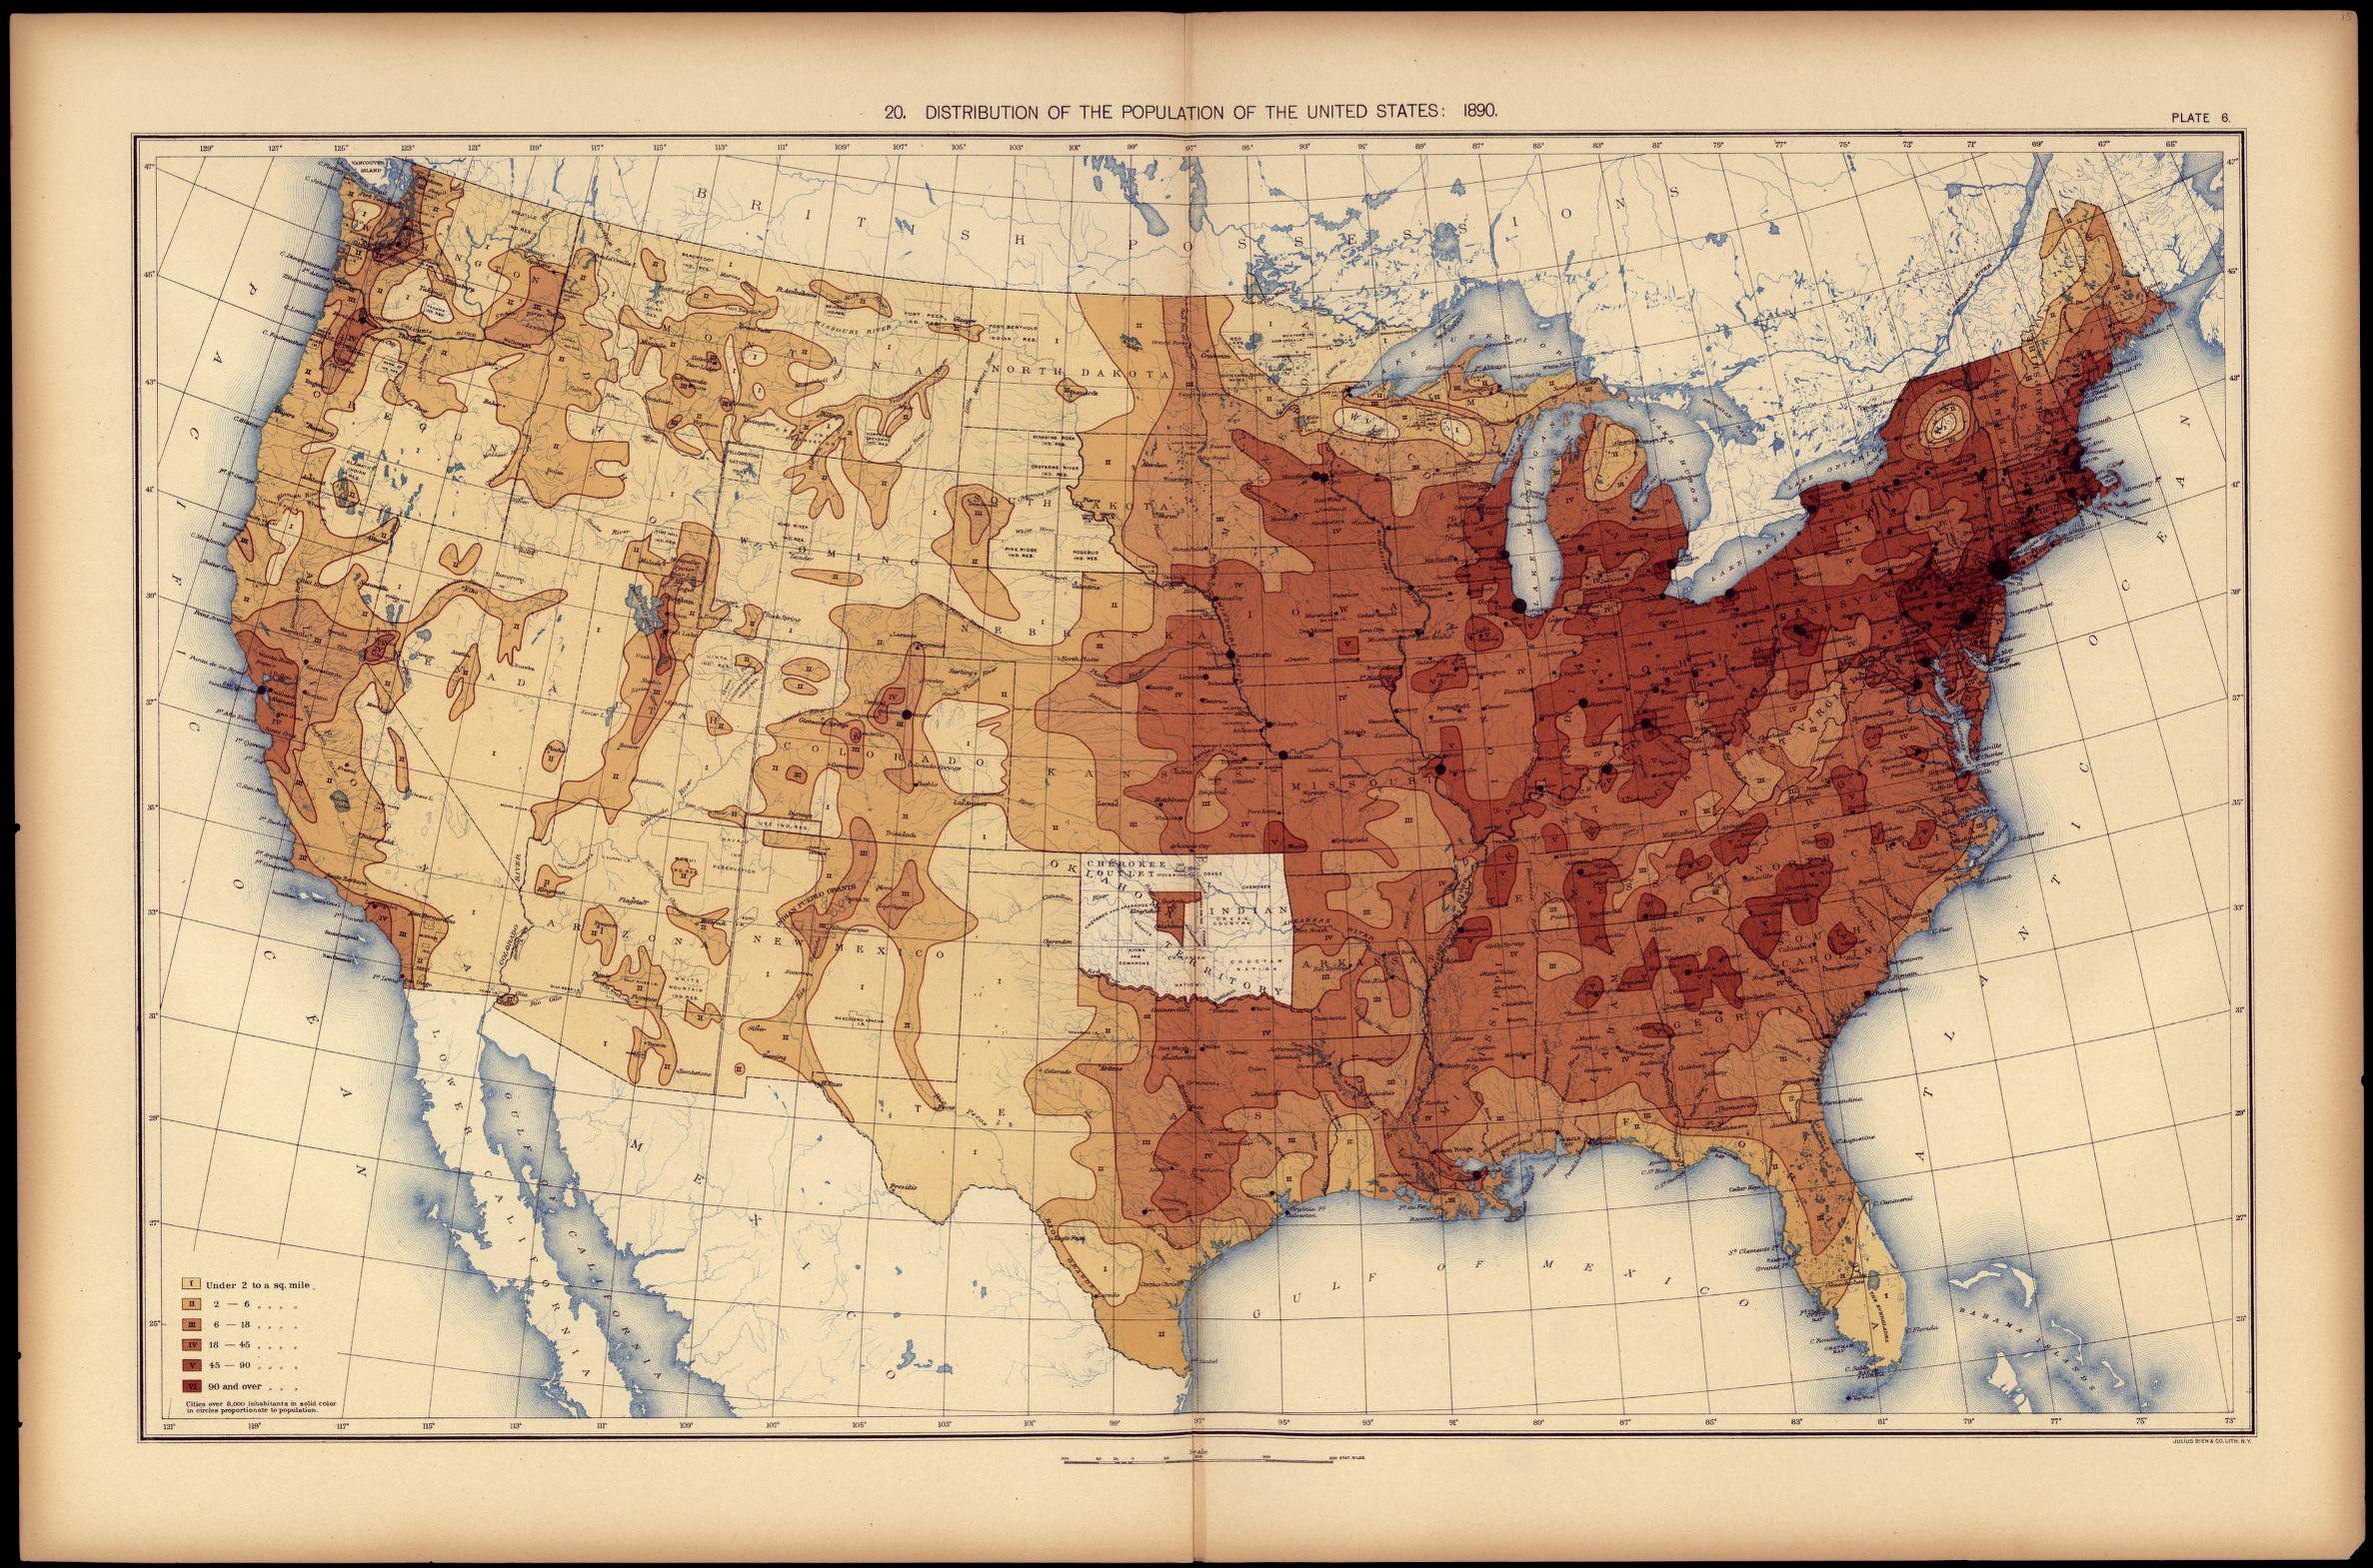 Distribution of the population of the United States: 1890